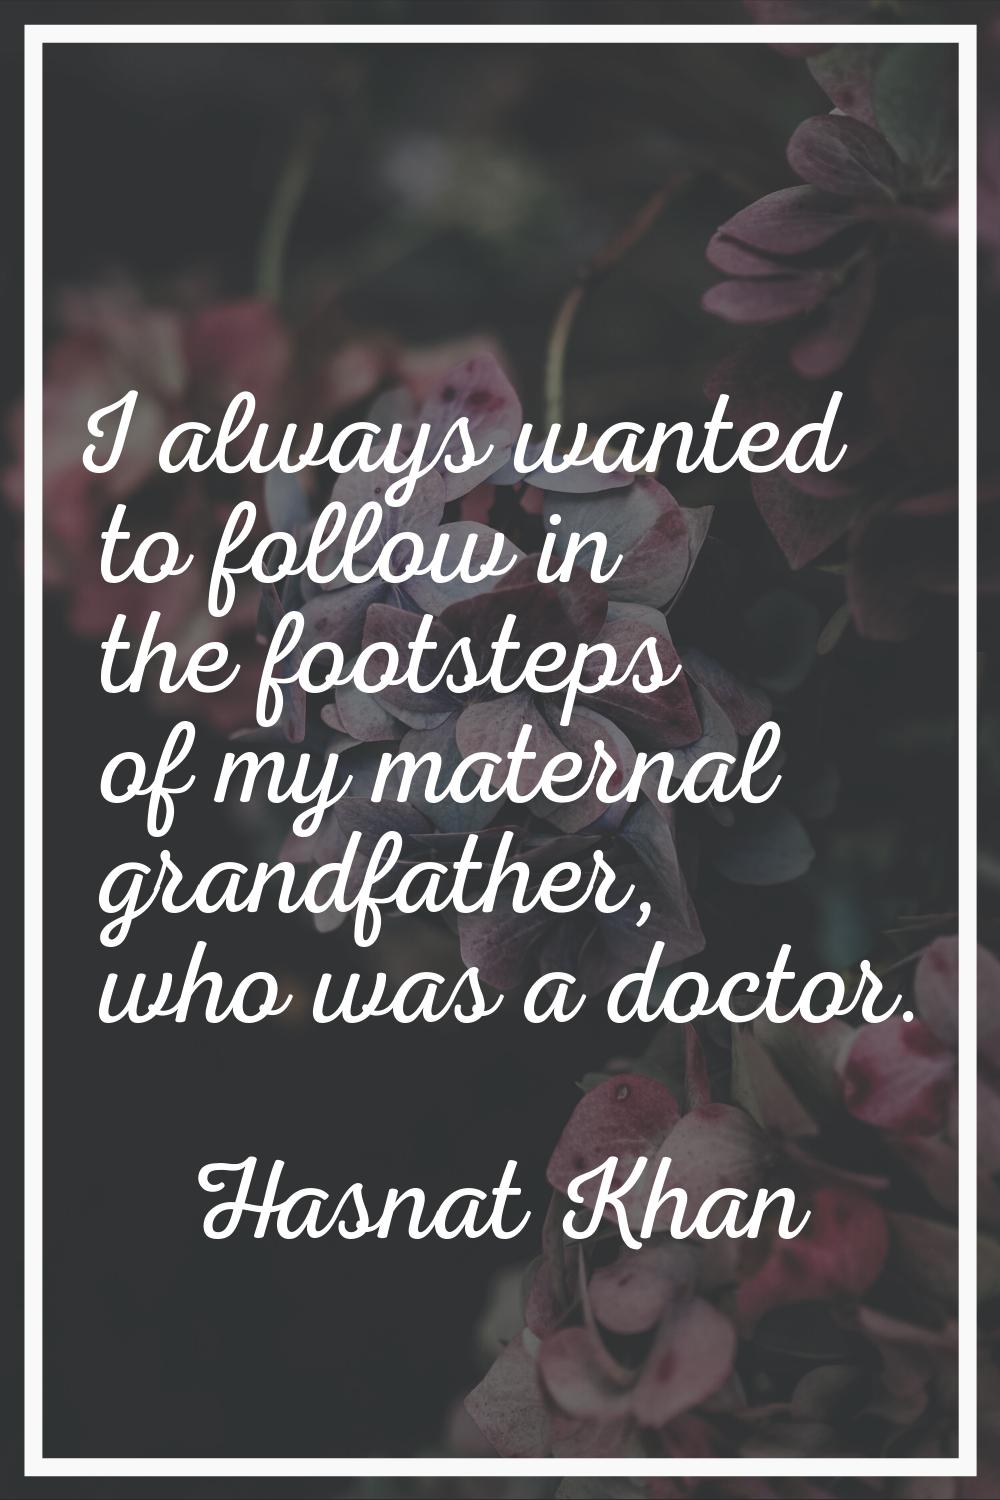 I always wanted to follow in the footsteps of my maternal grandfather, who was a doctor.